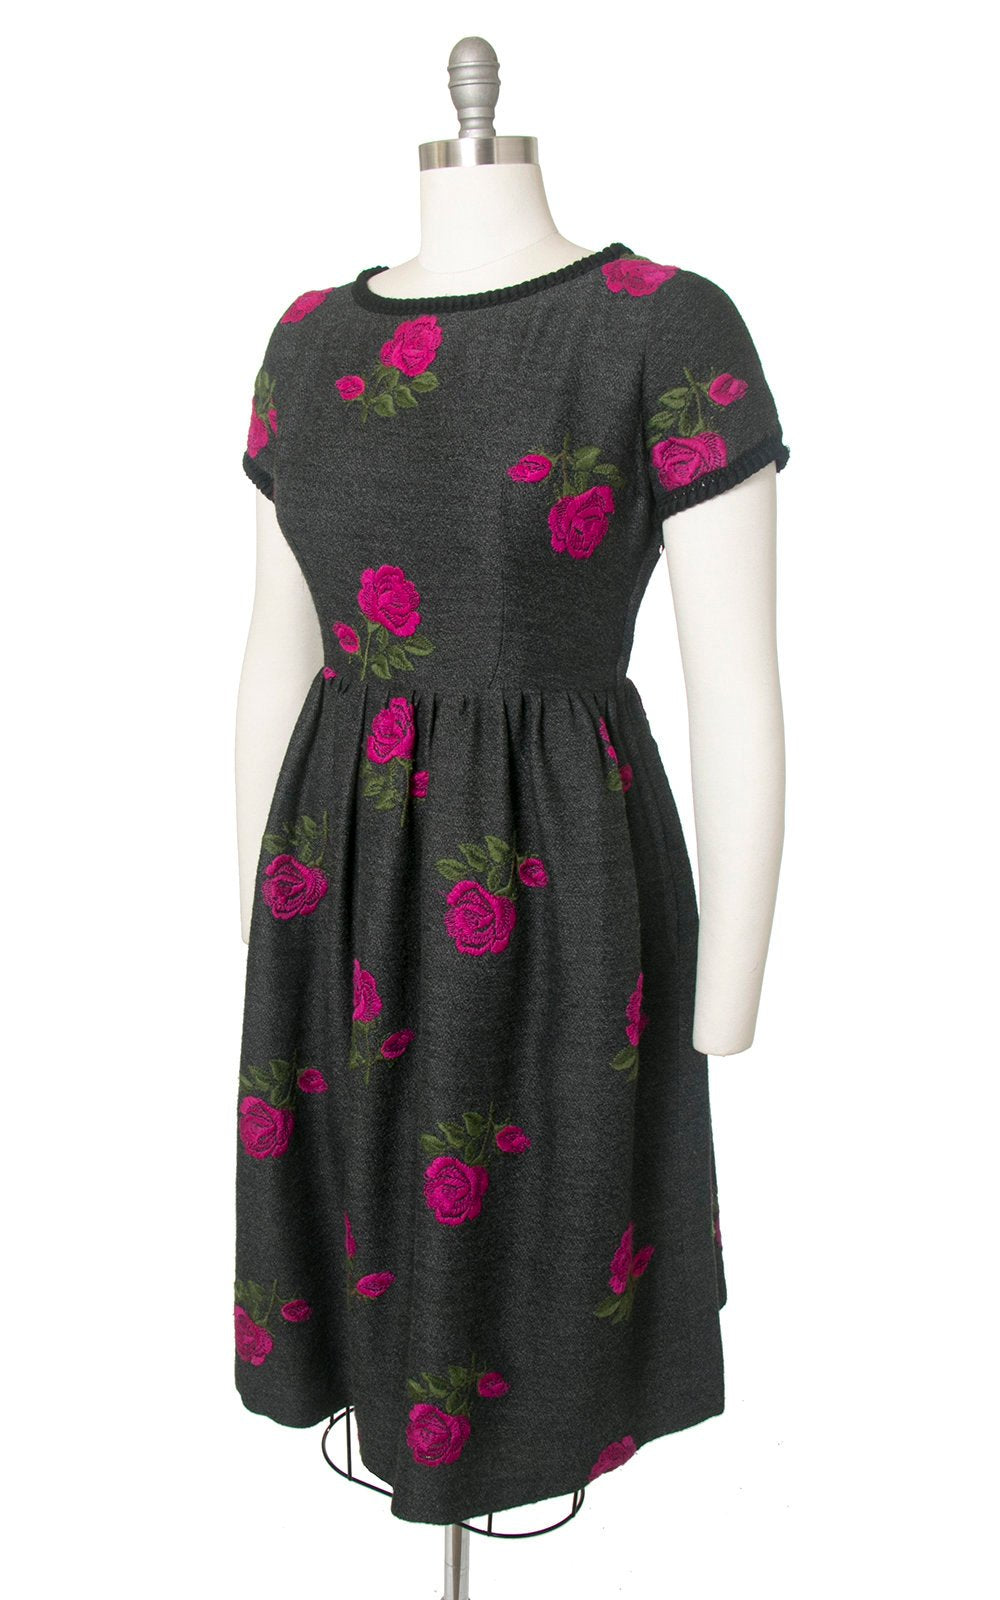 Vintage 1950s Dress | 50s Rose Floral Embroidered Wool Grey Gray Full Skirt Day Dress (medium)